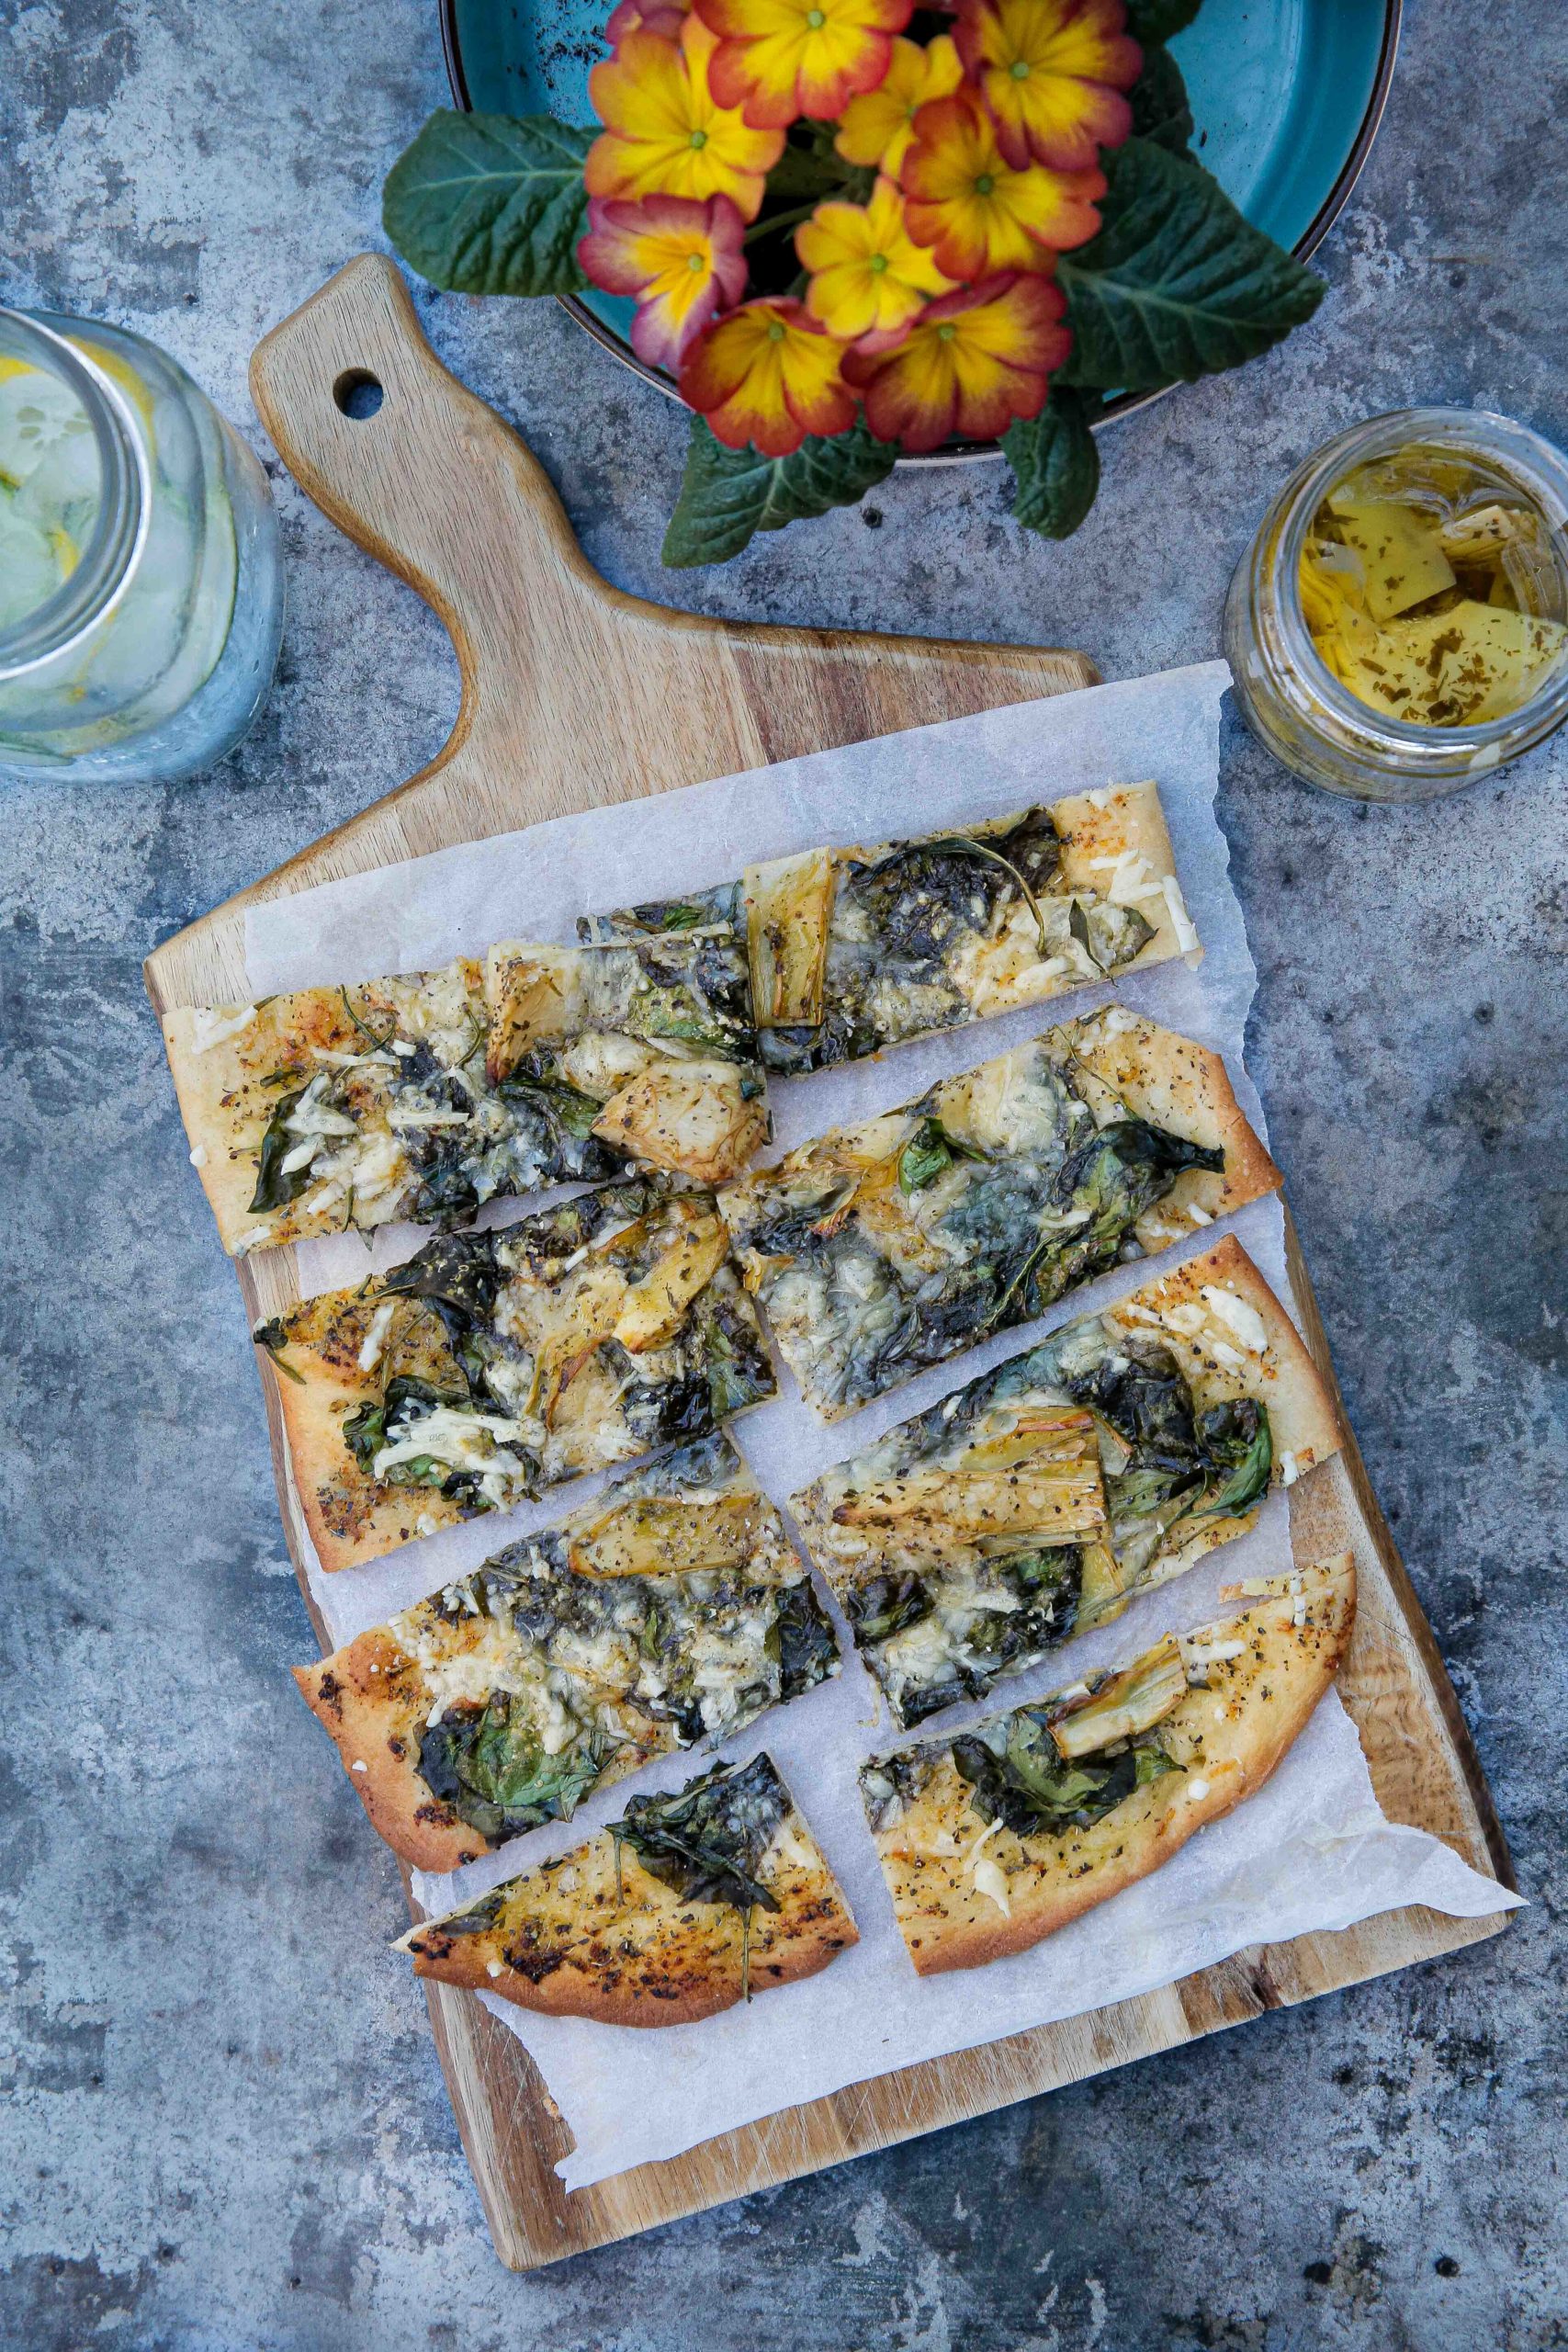 Garlicky, herby and cheesy this vegan spinach and artichoke pizza is so easy to make, so much cheaper than takeaway and beyond delicious! Recipe on thecookandhim.com #veganpizza #pizzarecipe #homemadepizza